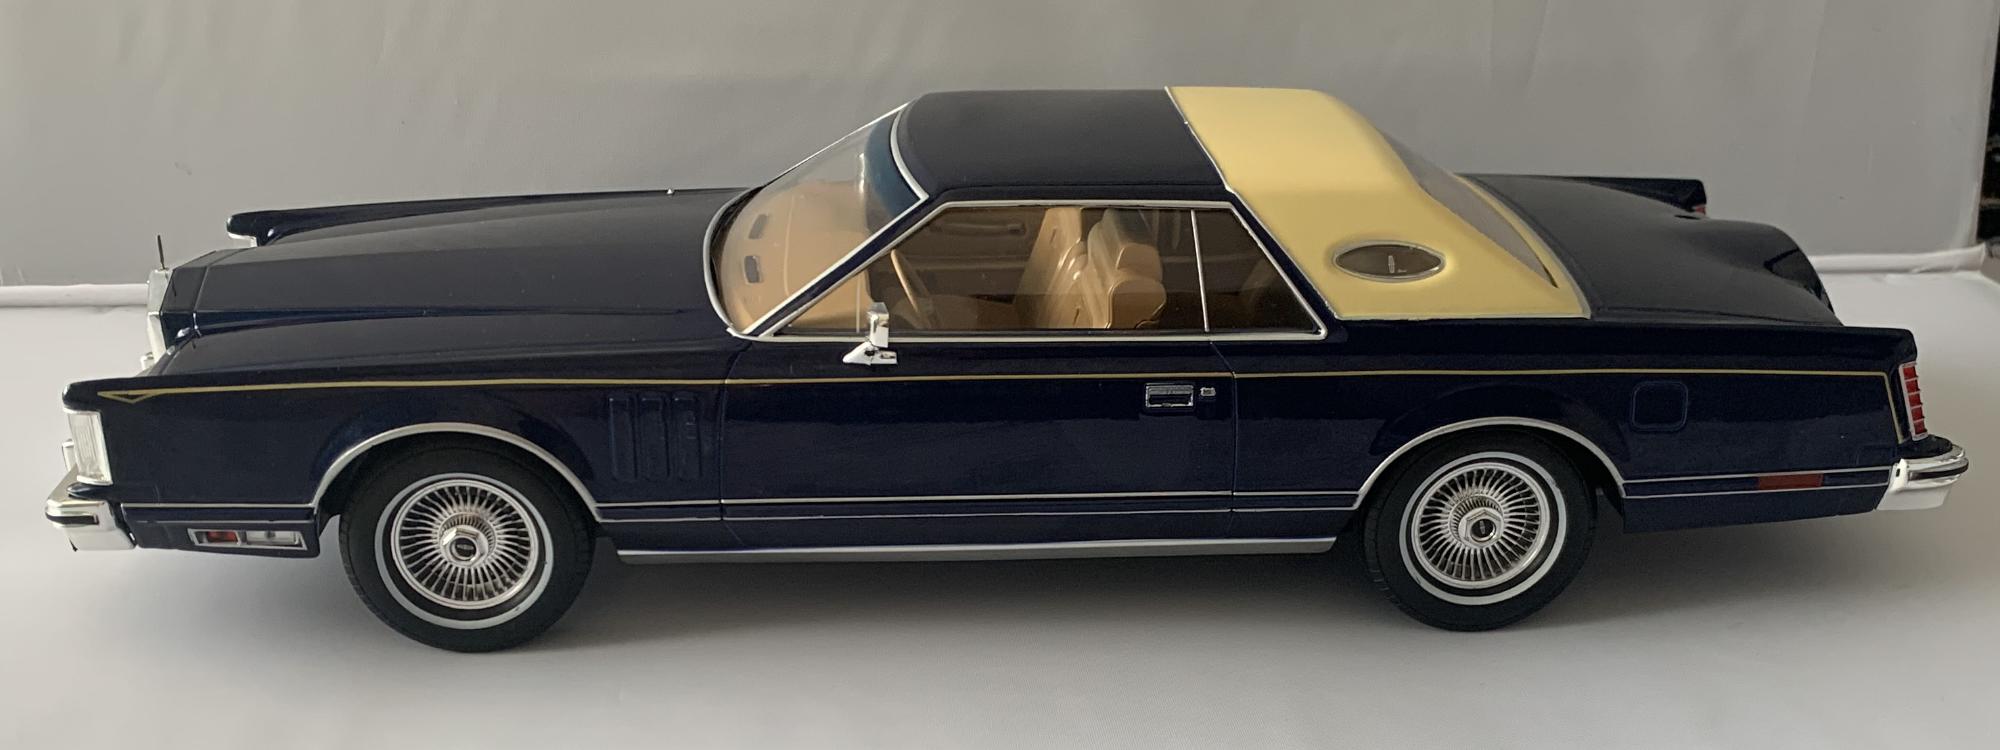 Lincoln Continental mk5 1977 in blue 1:18 scale model from Model Car Group, 18215